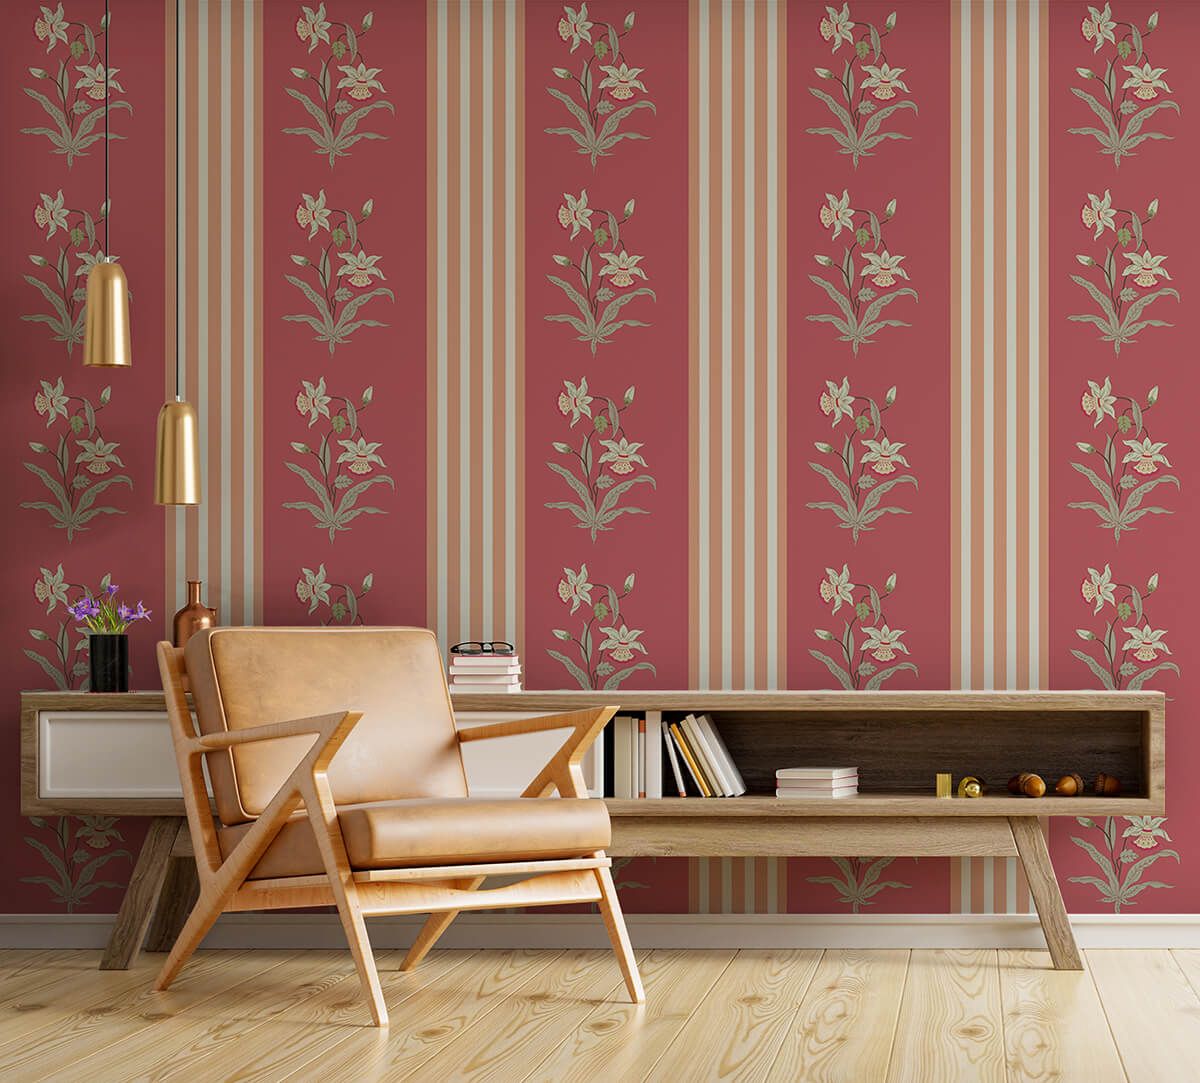 Indian Hand Painted Look Floral Design Wallpaper  lifencolors